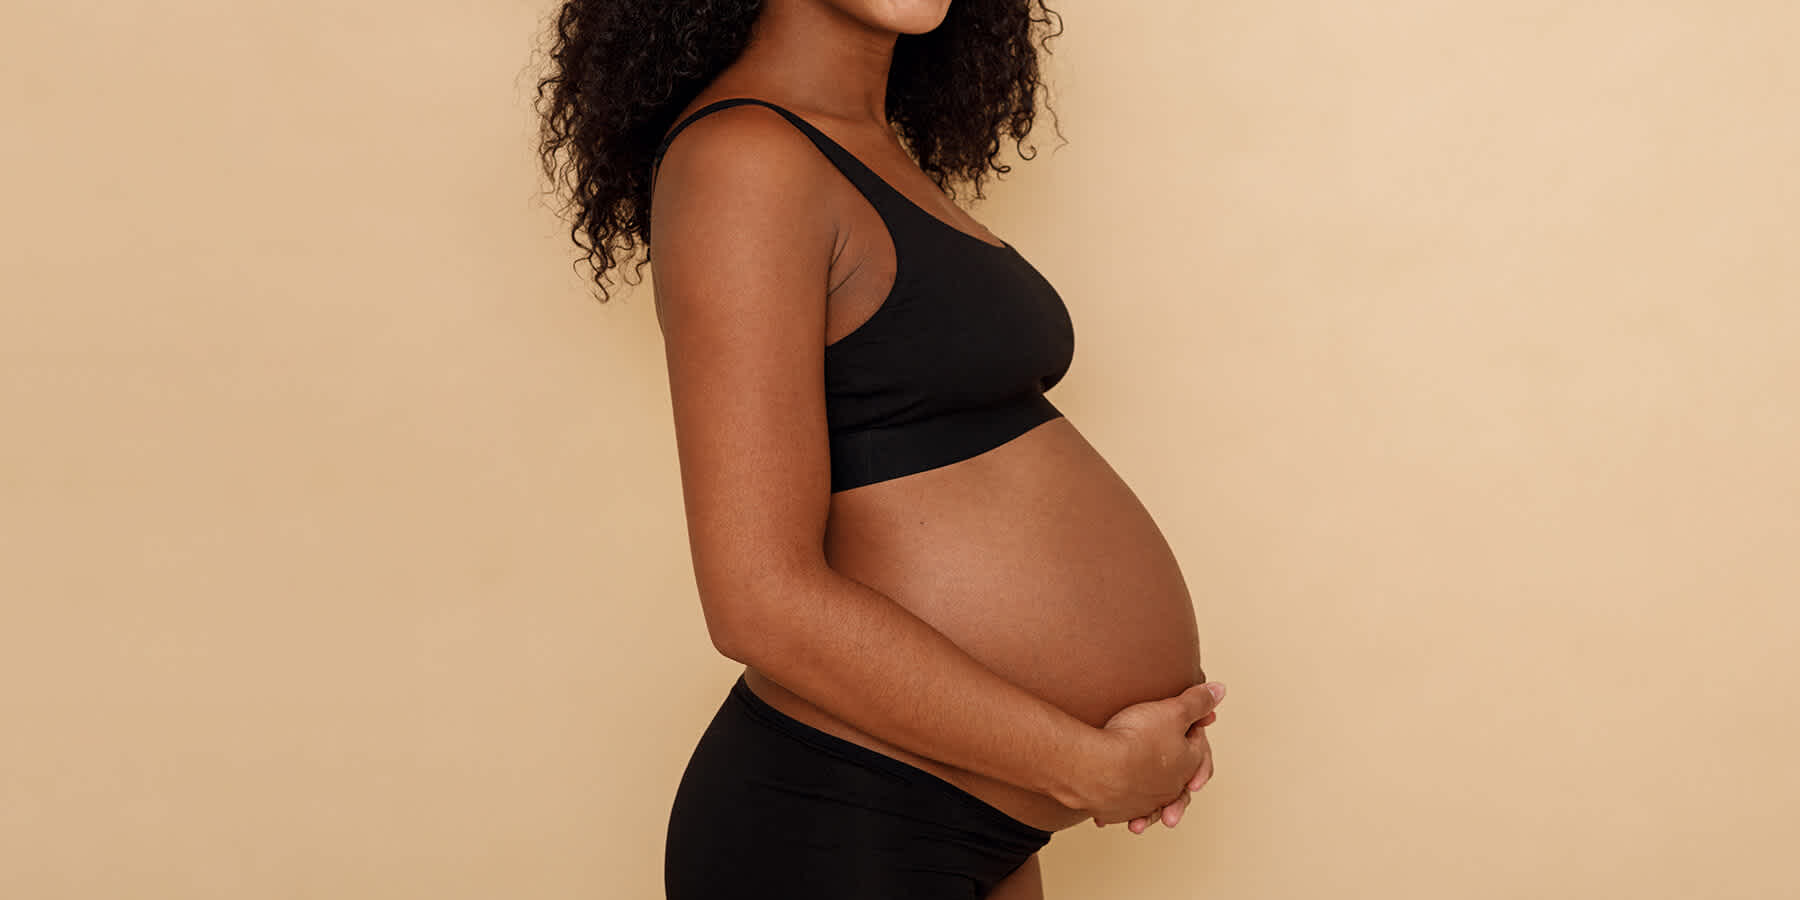 Pregnant woman holding belly against yellow background